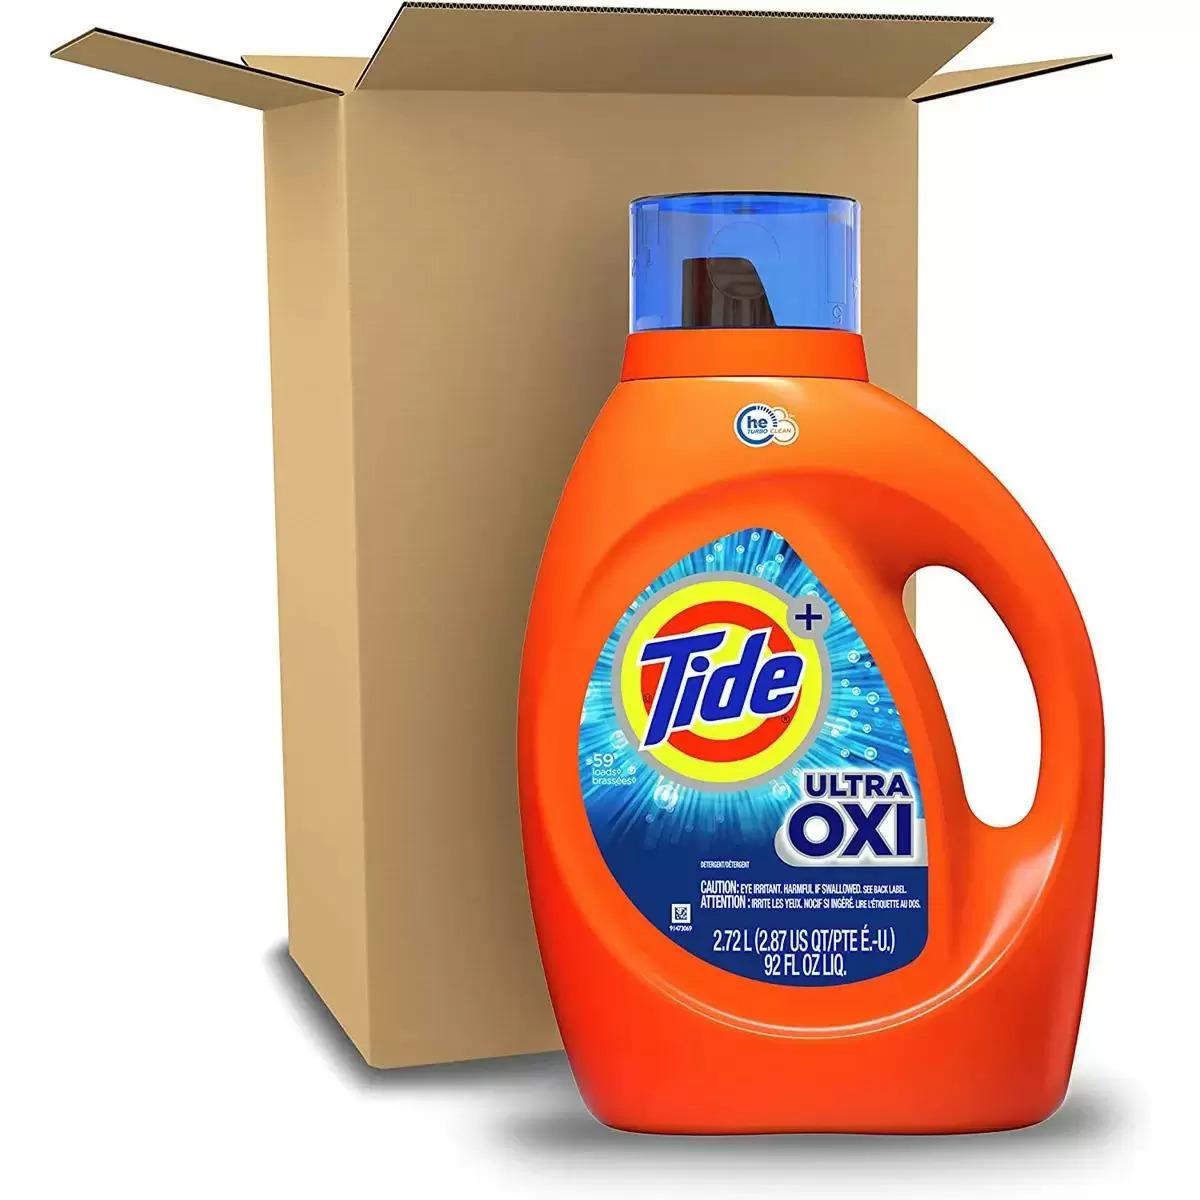 Tide Ultra Oxi Laundry Detergent Liquid Soap for $9.01 Shipped